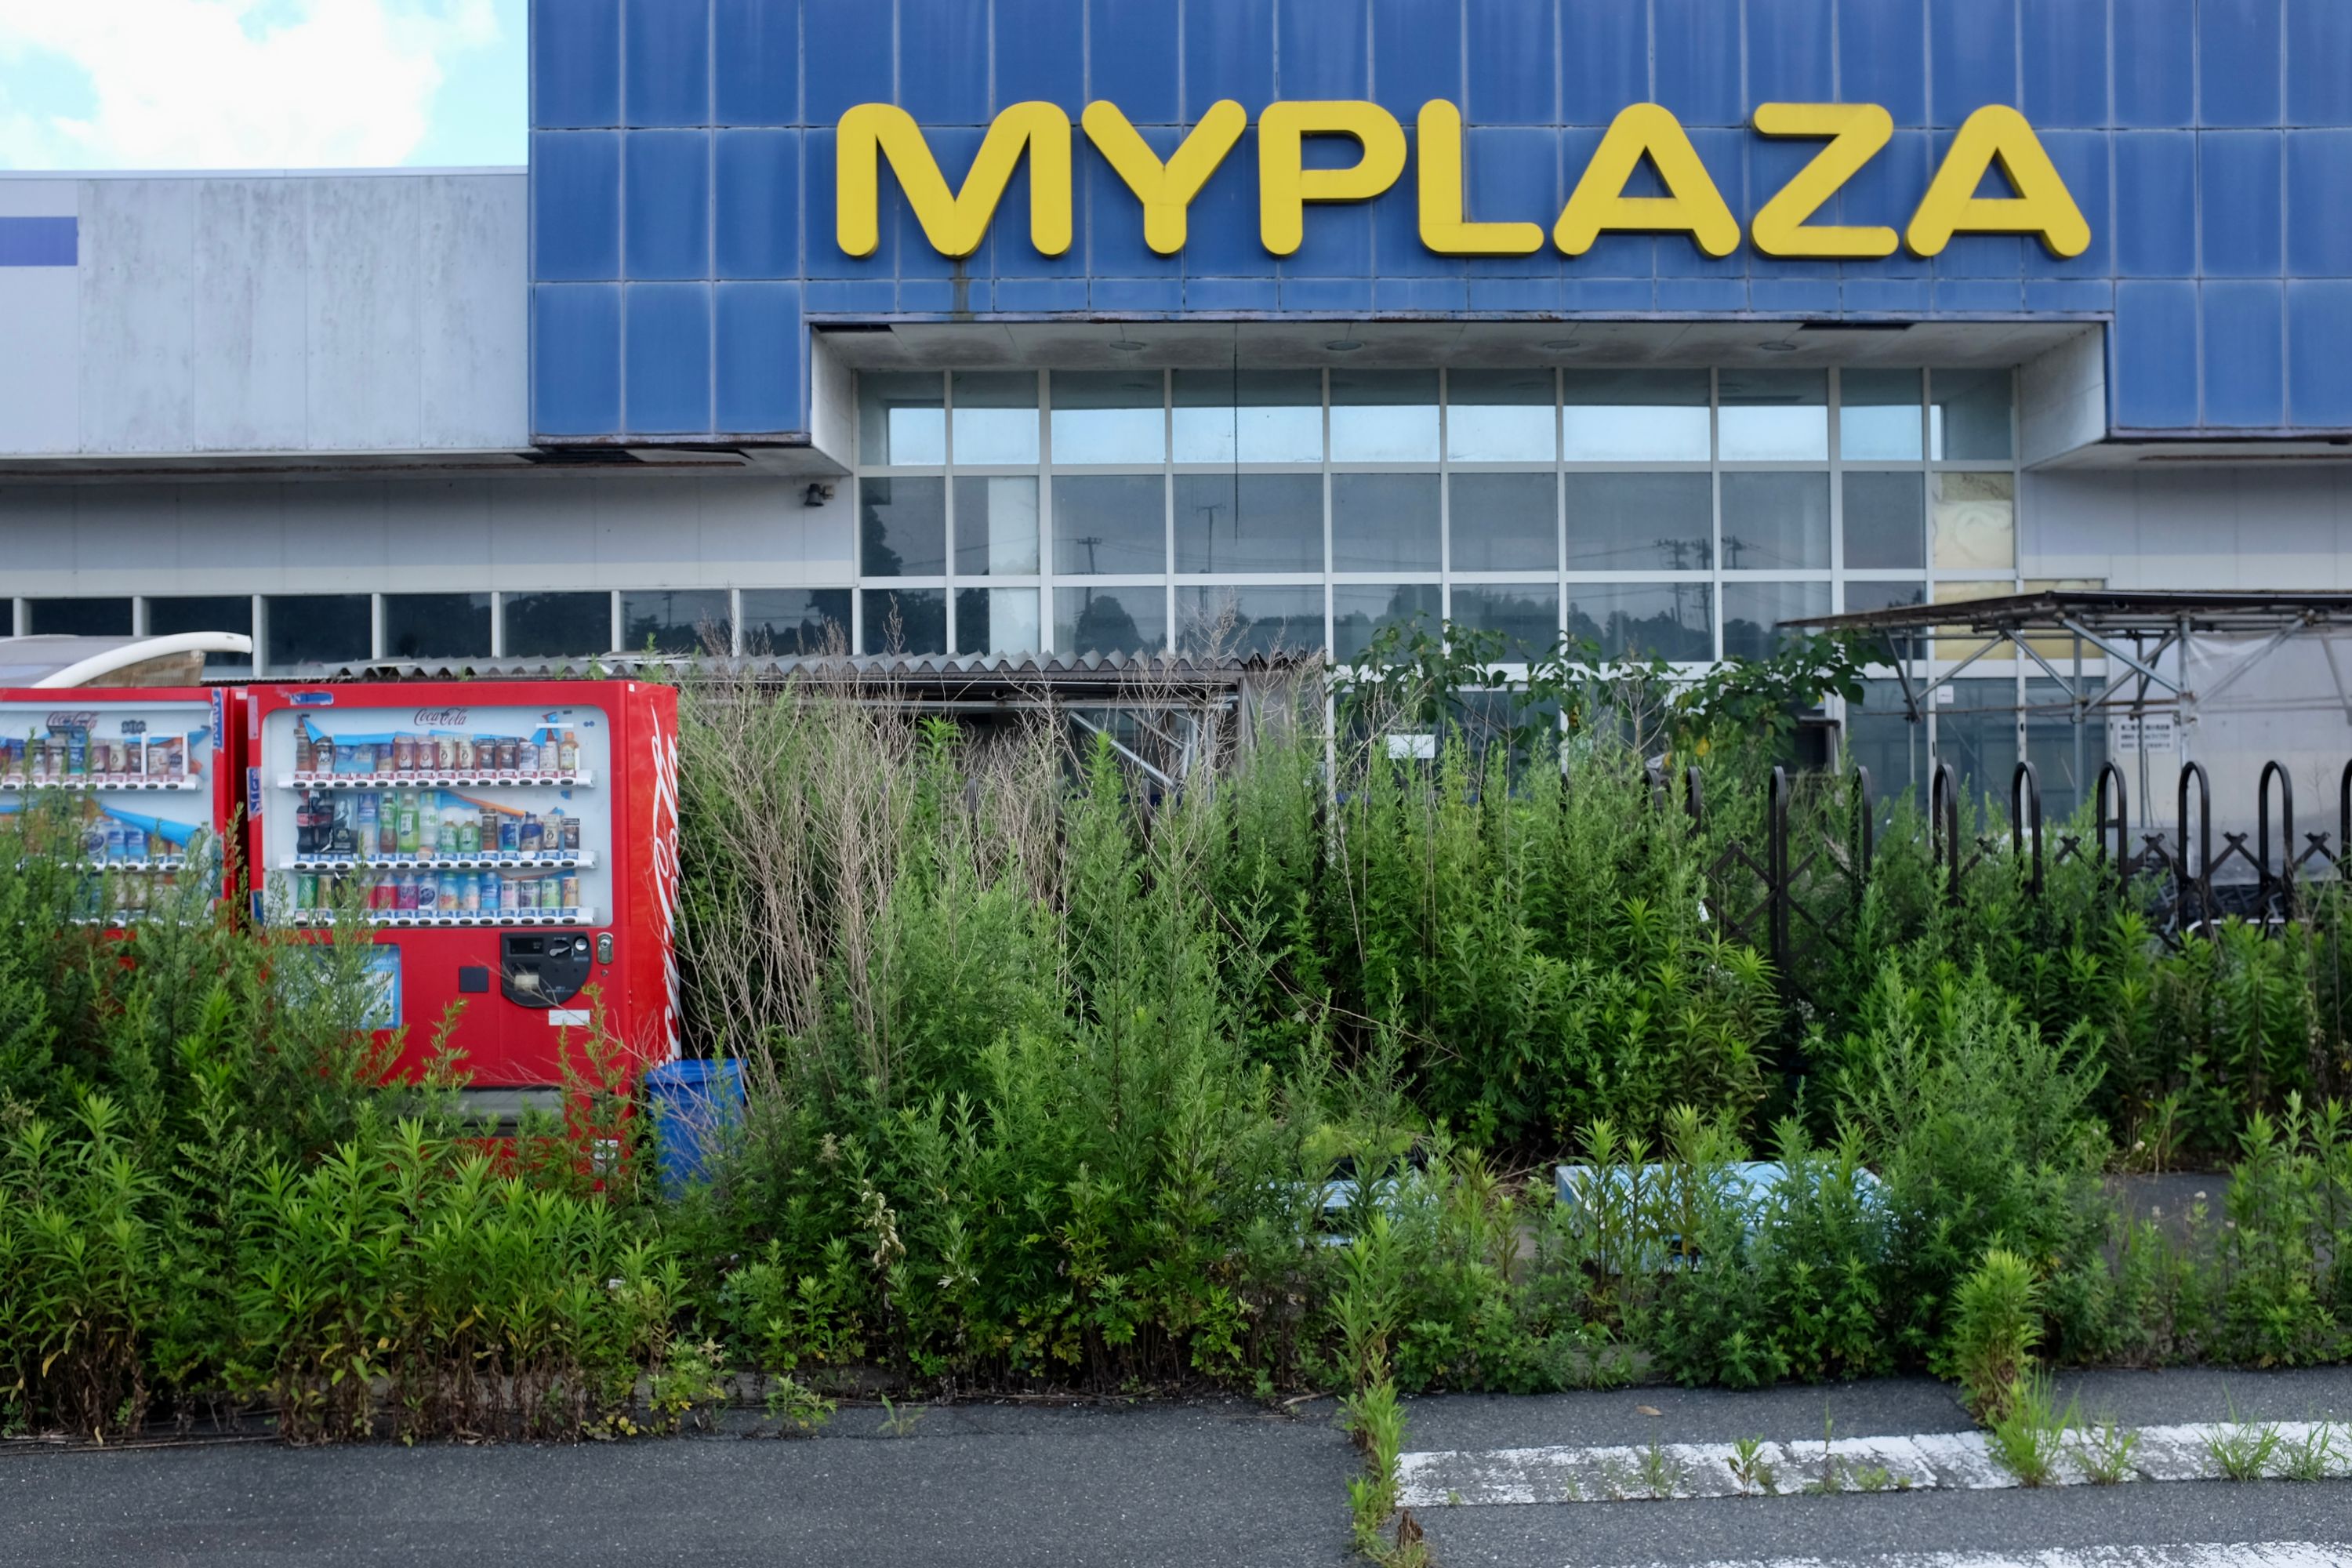 Vending machines overgrown with weeds in front of an abandoned shopping center named Myplaza.